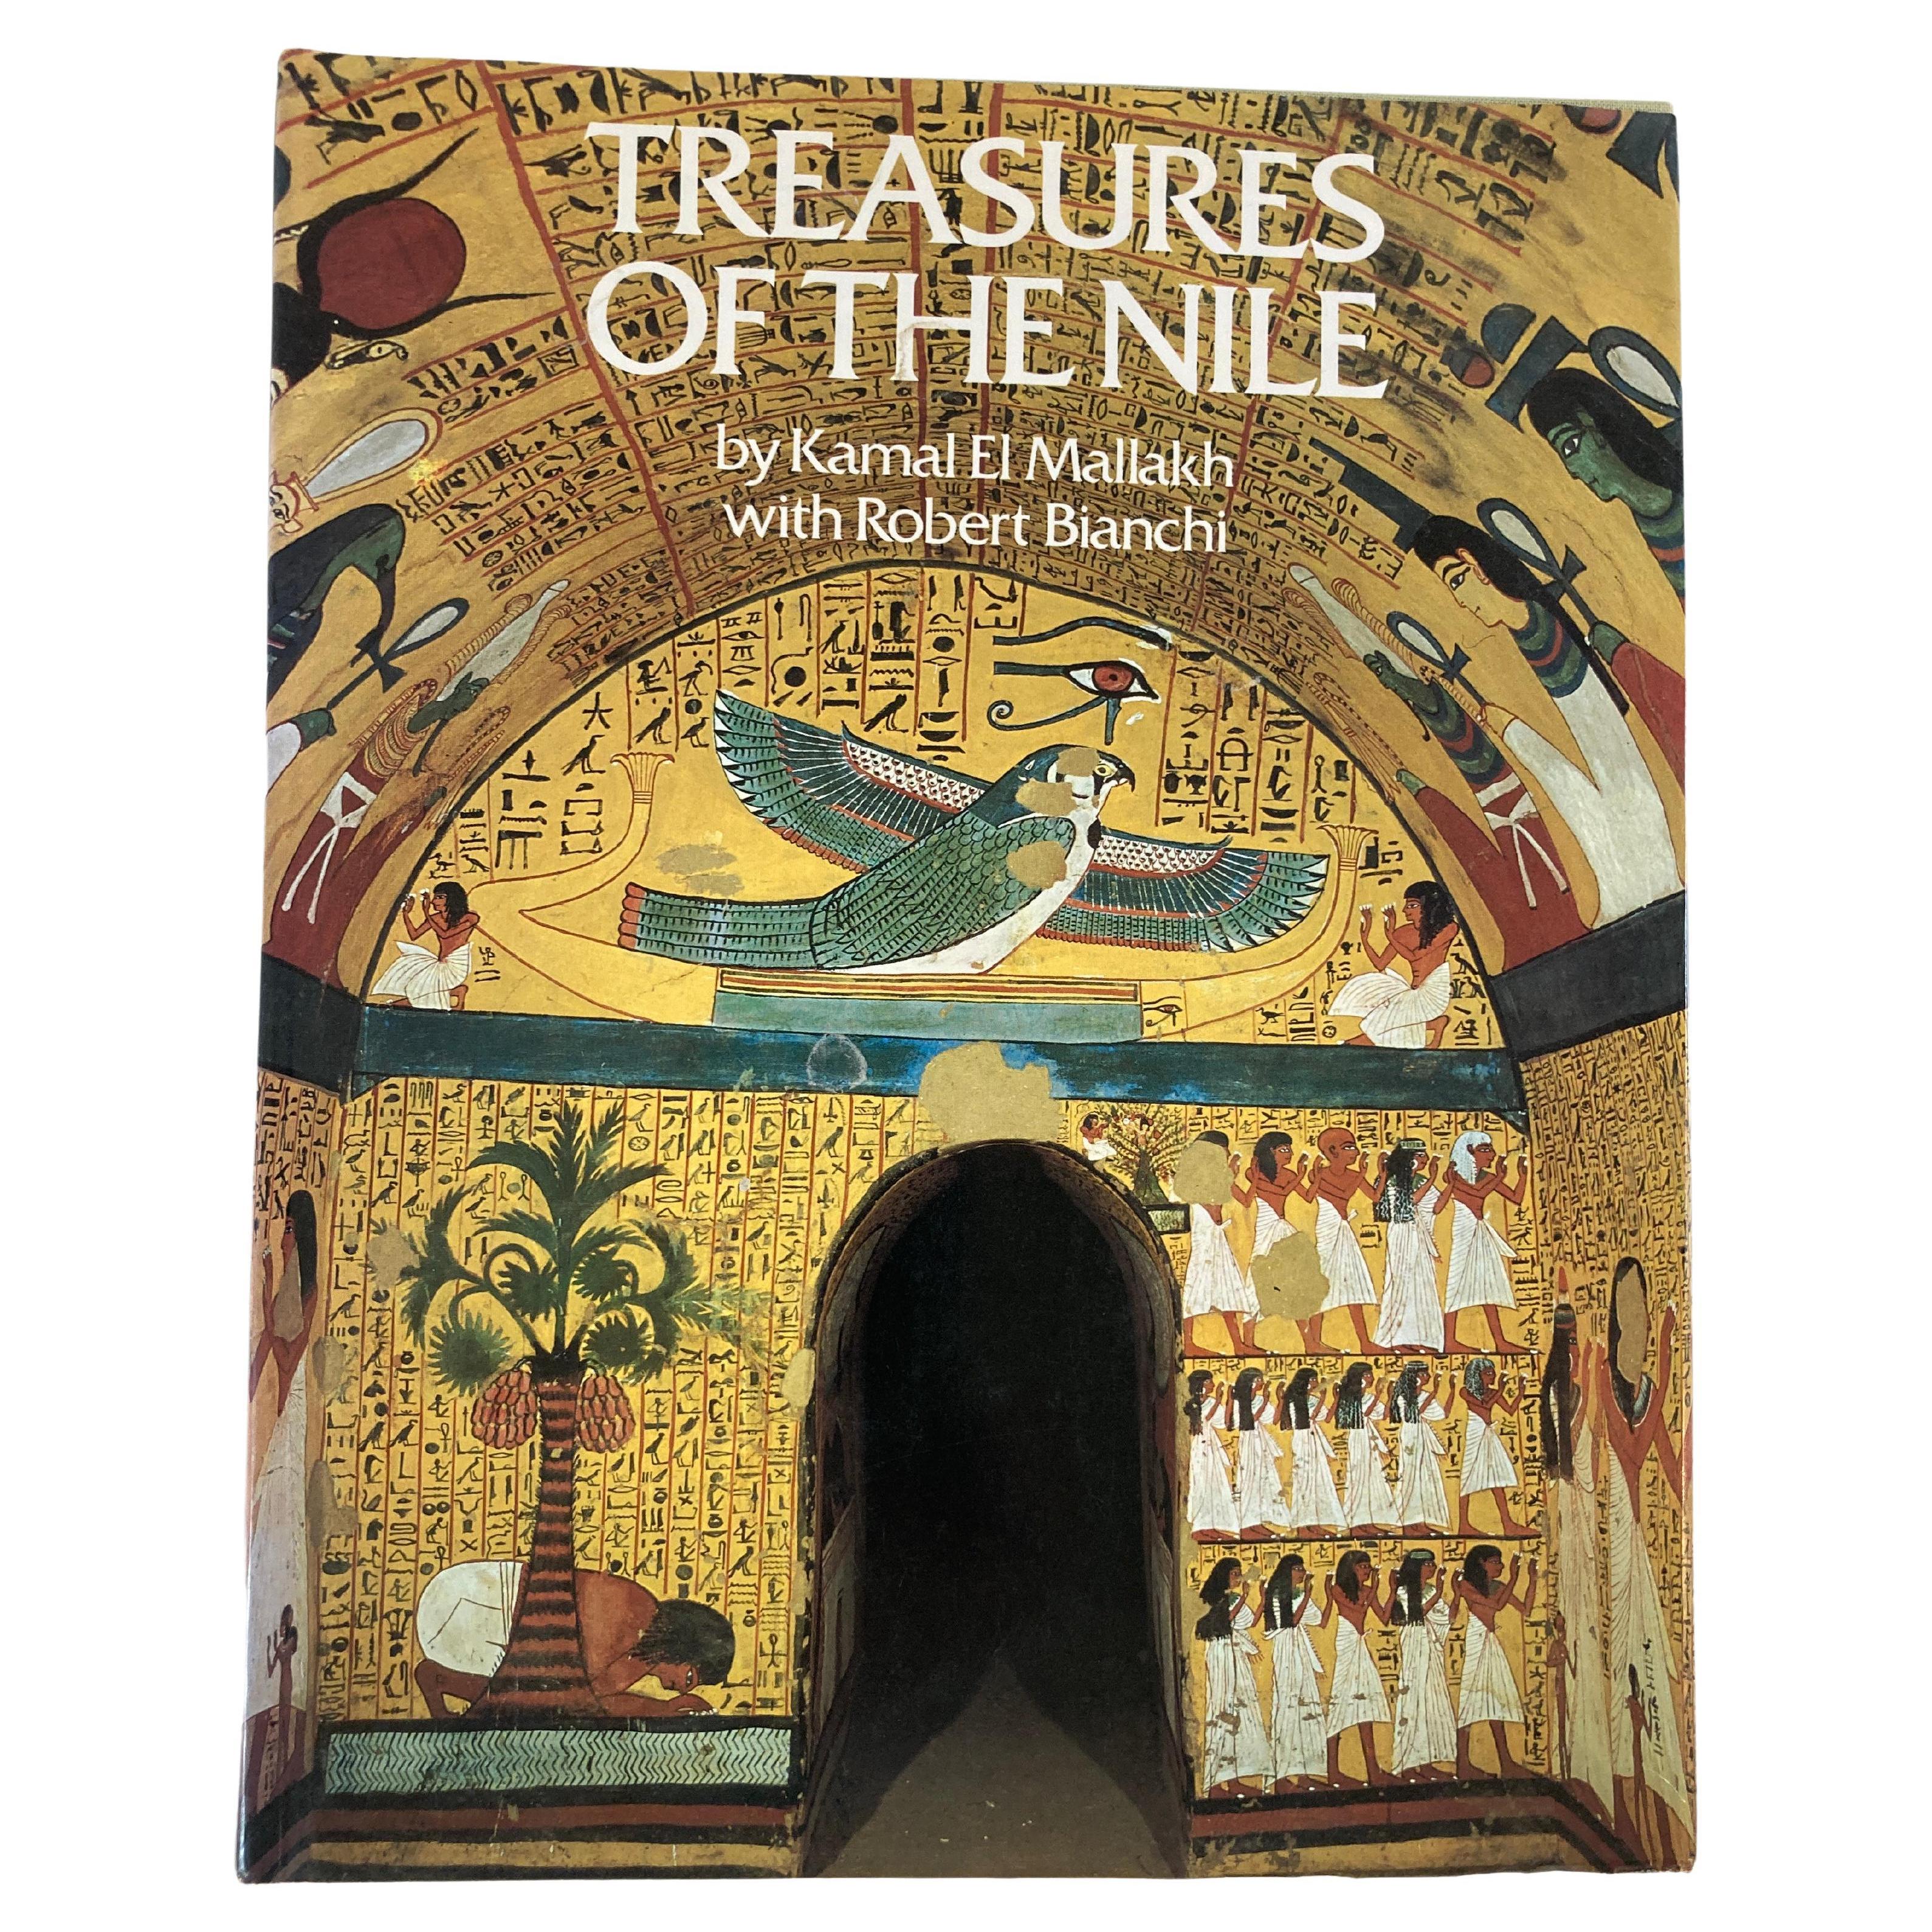 Treasures Of The Nile: Art Of The Temples And Tombs Of Egypt
This book is crammed with Egyptian art, and excavation photographs, as well as text. 
Fascinating, more than a guide this volume, with its superb color reproductions often on the same